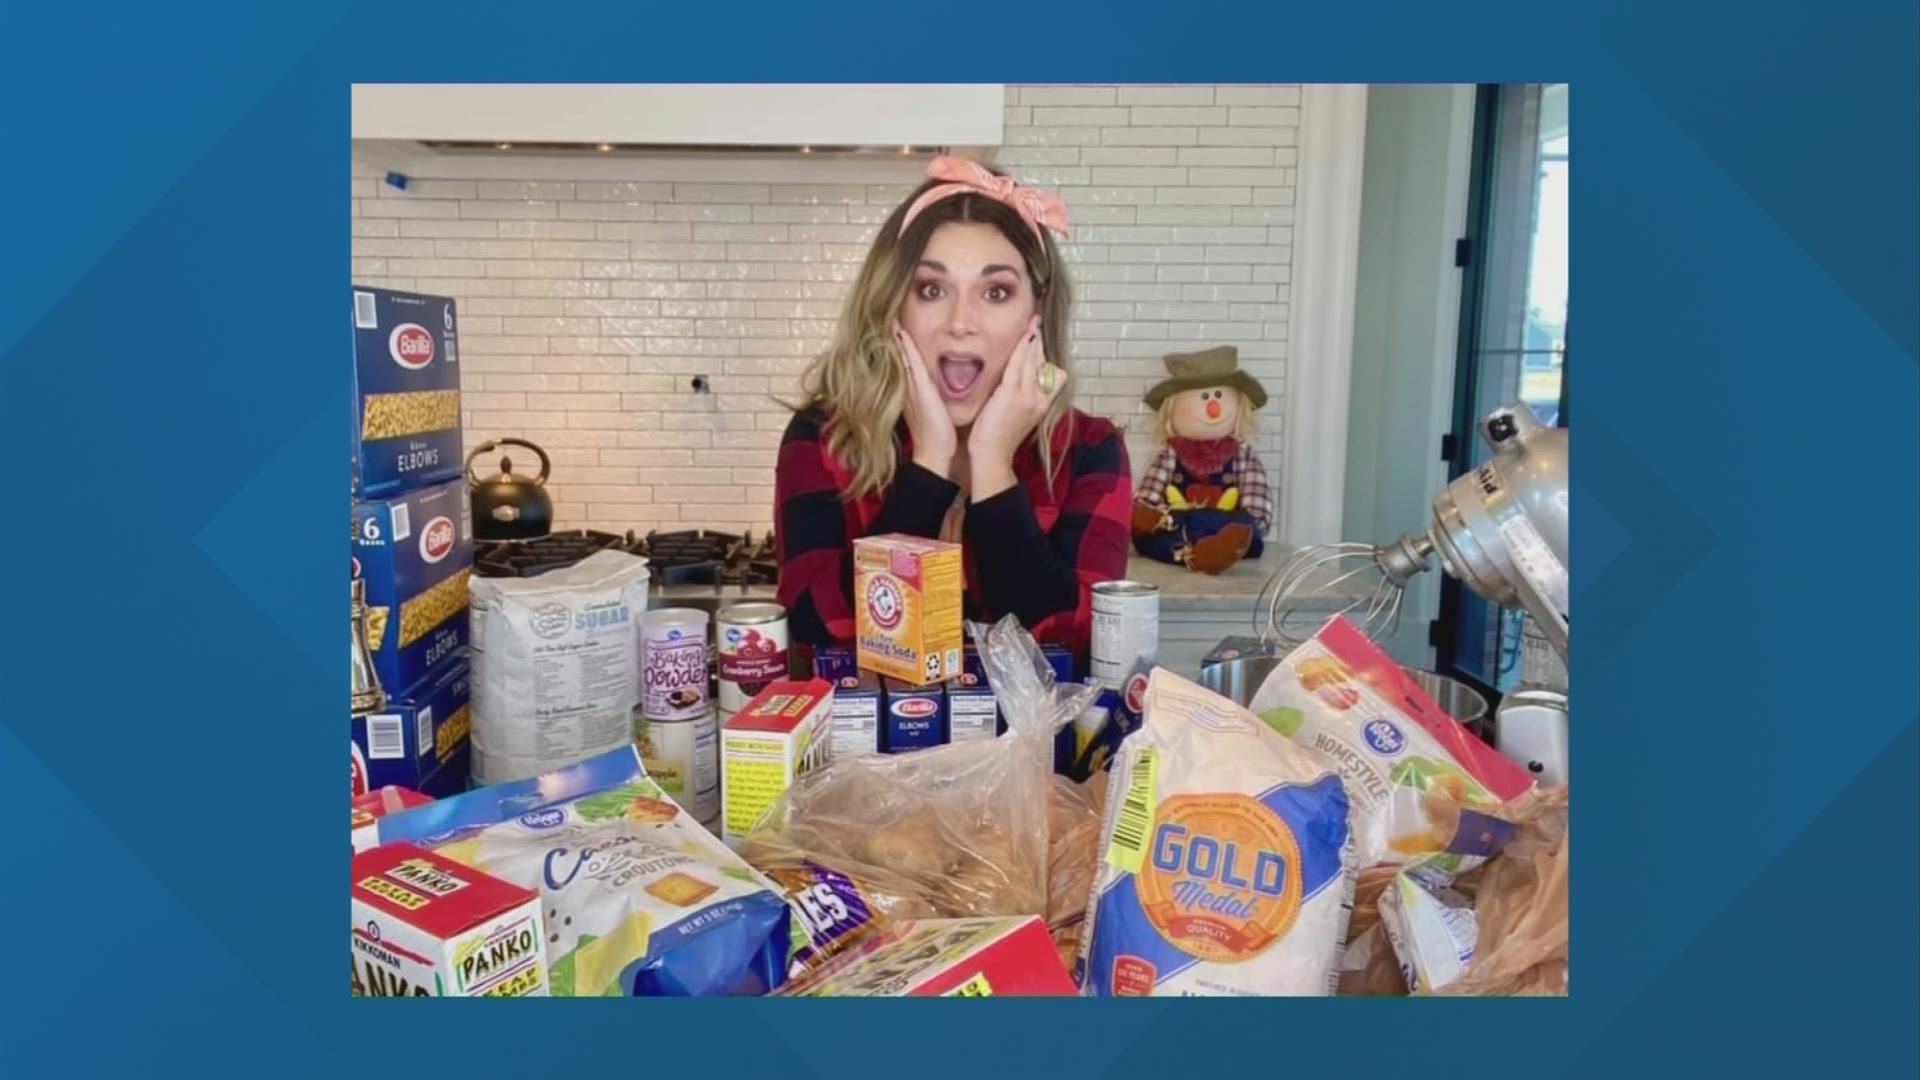 Kelley Lewis came up with "Neighborsgiving" where she's helping feed people in need for the holidays.